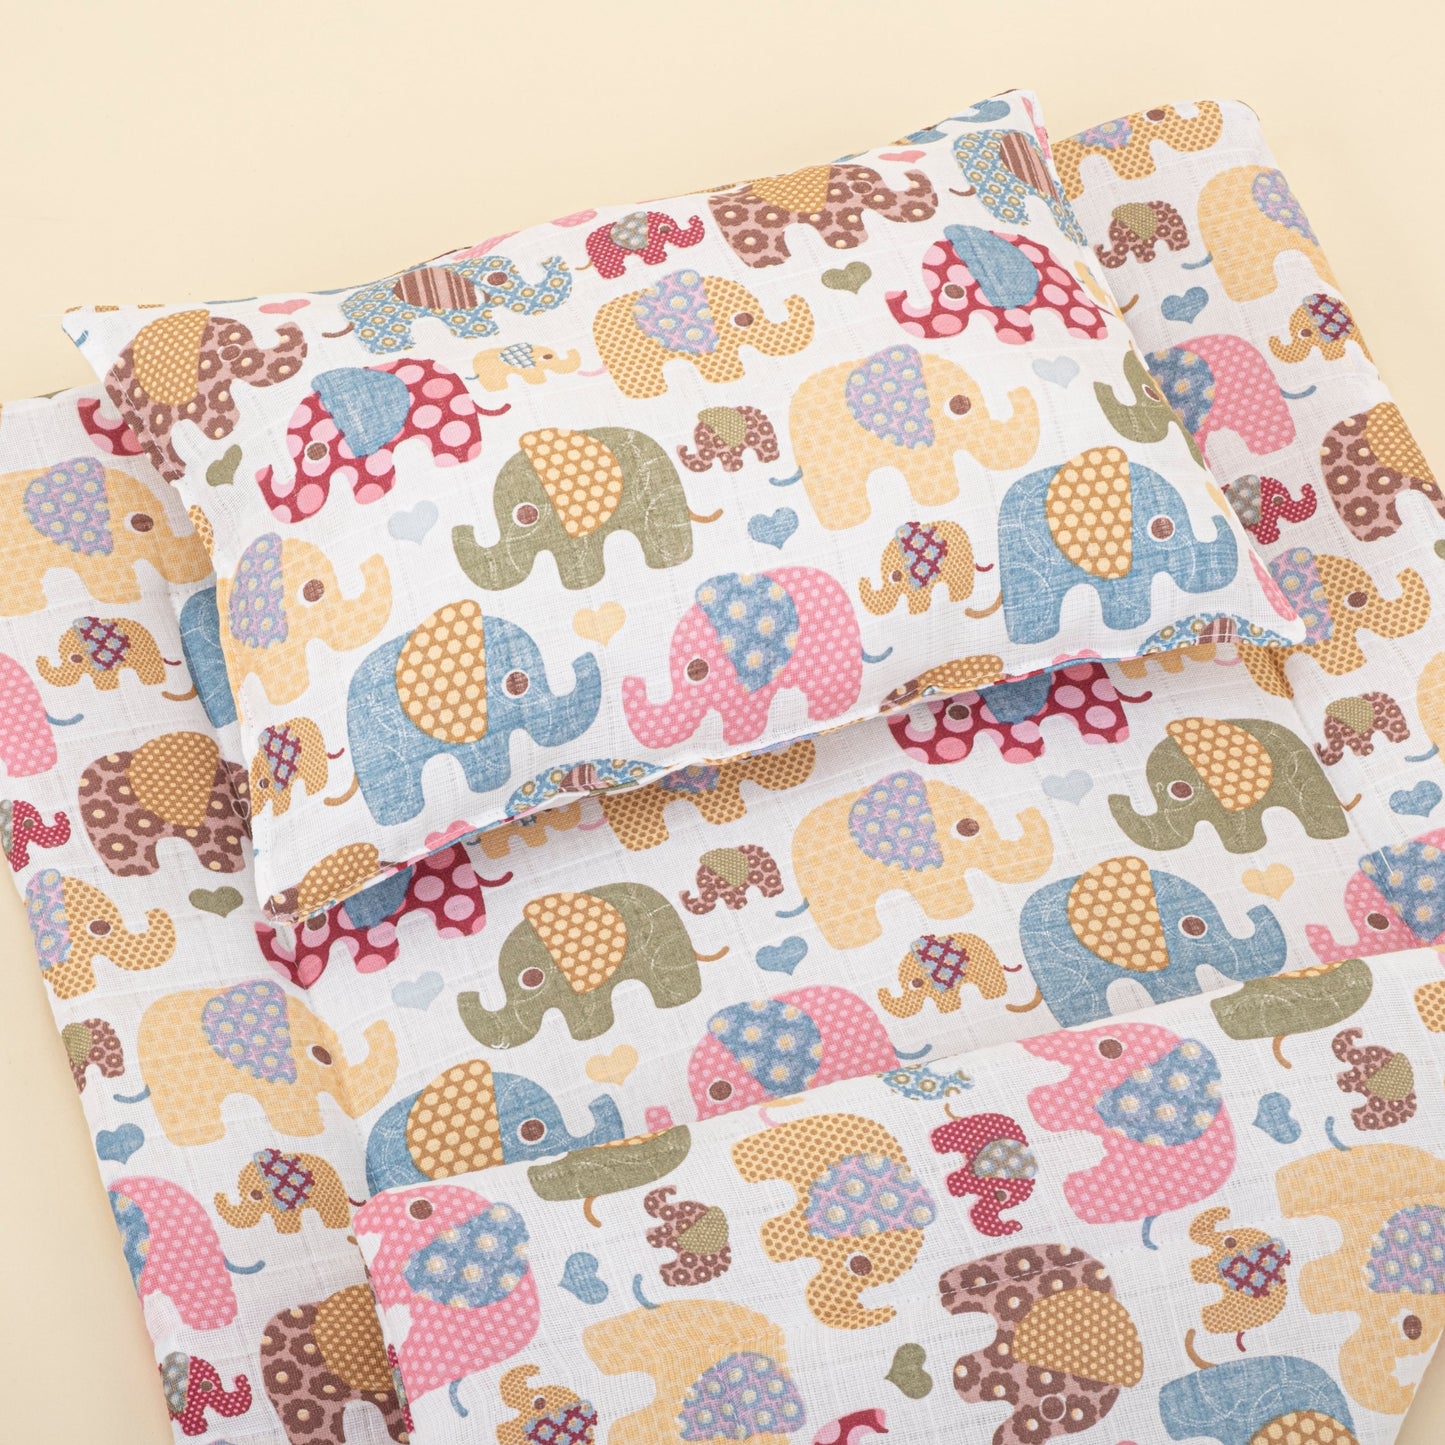 10 Pieces - Newborn Baby Sets - Summery Collection - Colorful Elephants